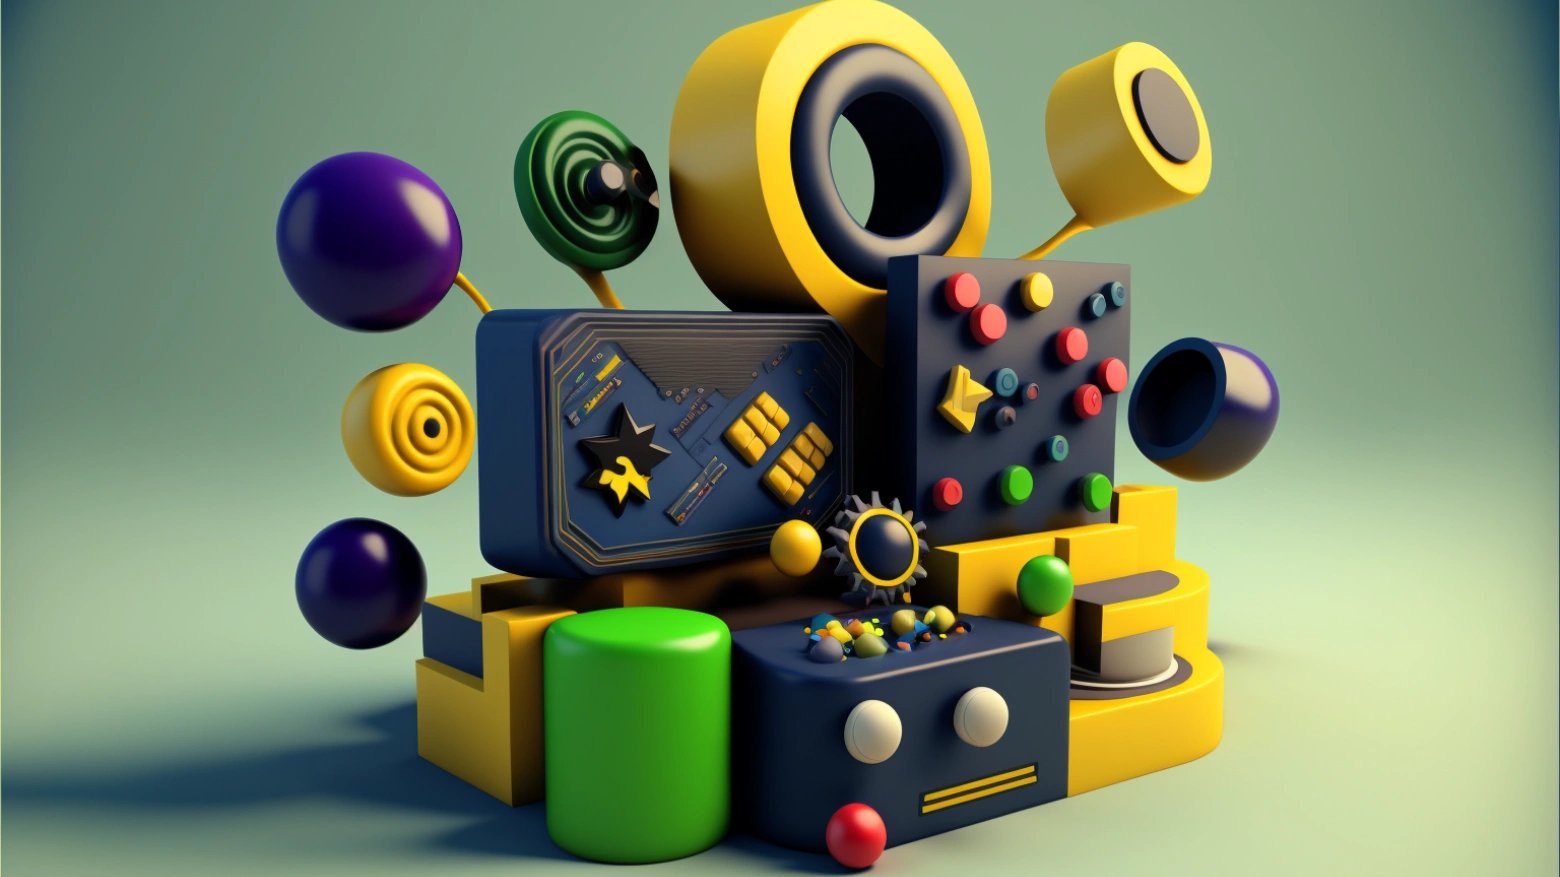 gamification-communication-3d-render-1